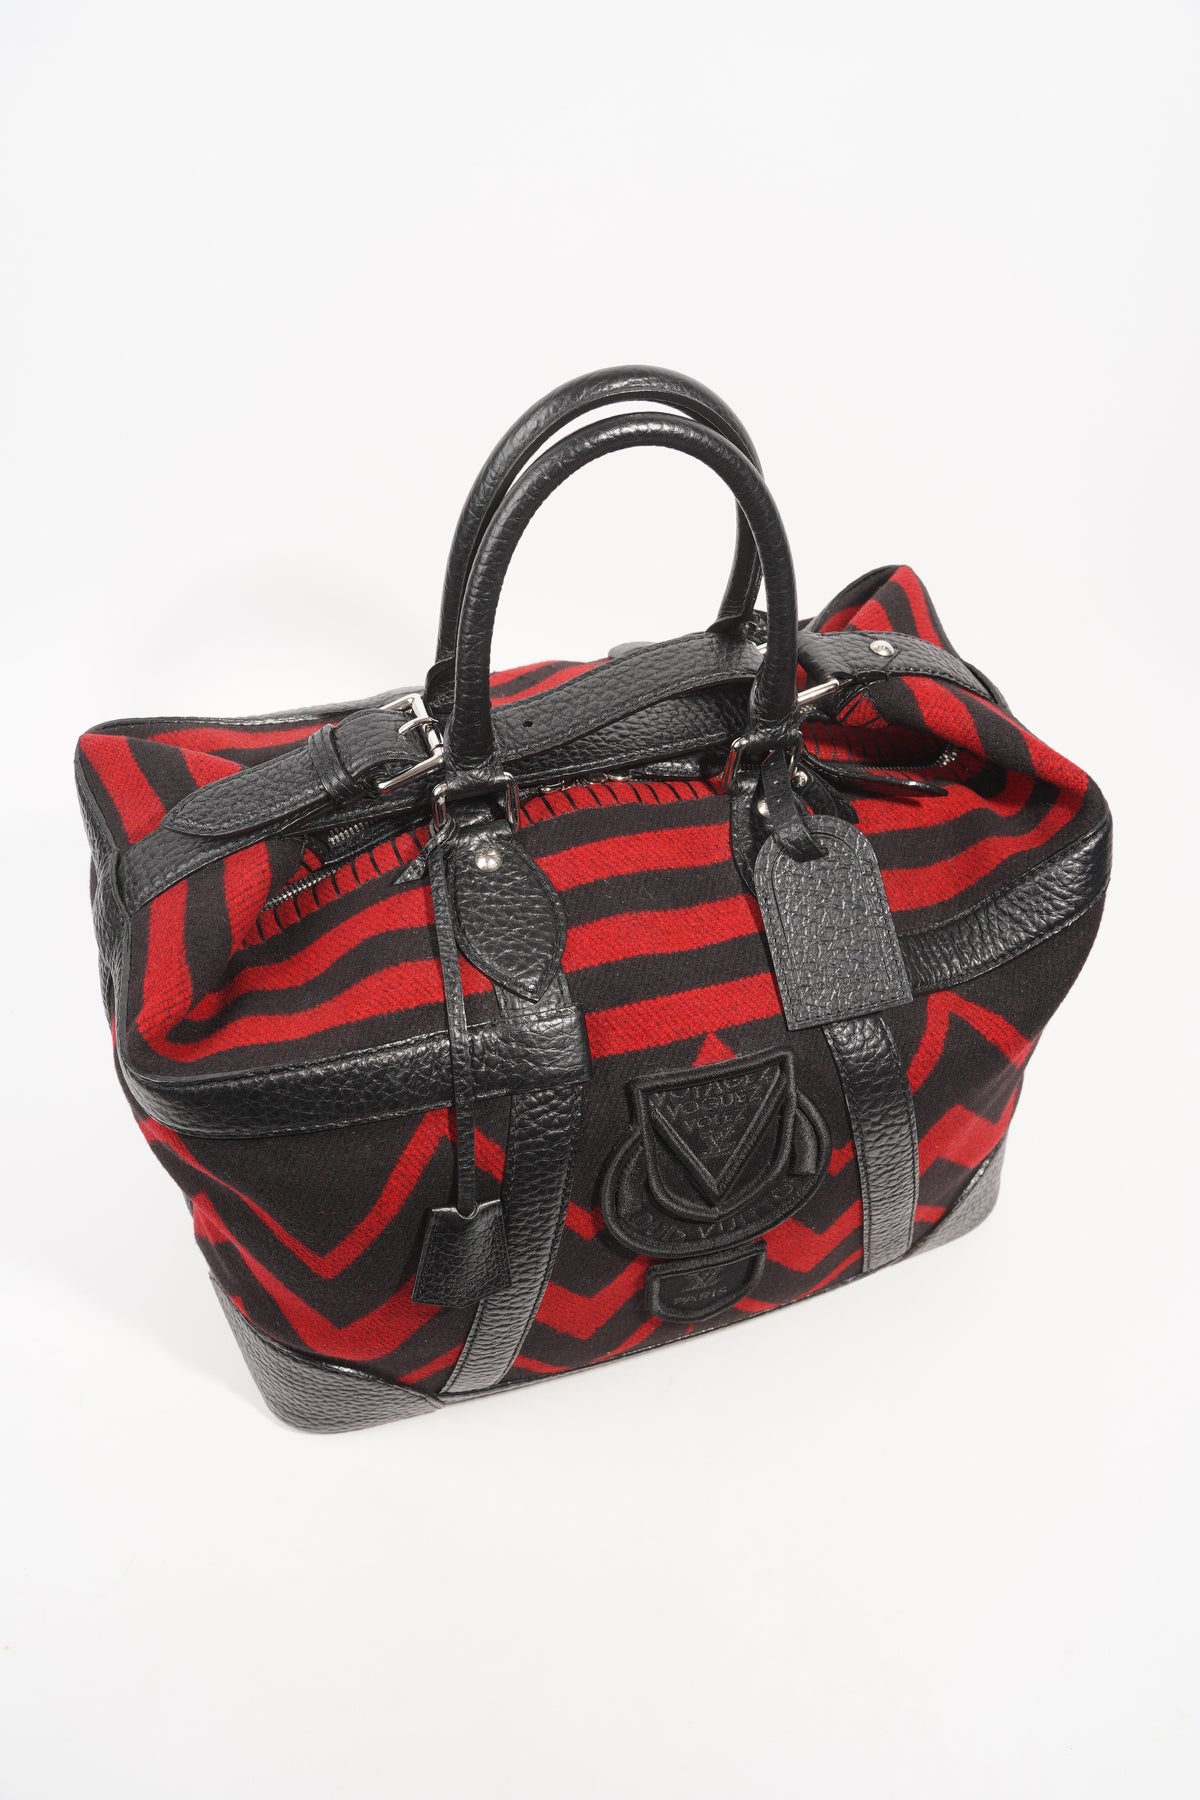 Louis Vuitton Limited Edition Vali Blanket Black & Red Bag 2006 - Katheley's